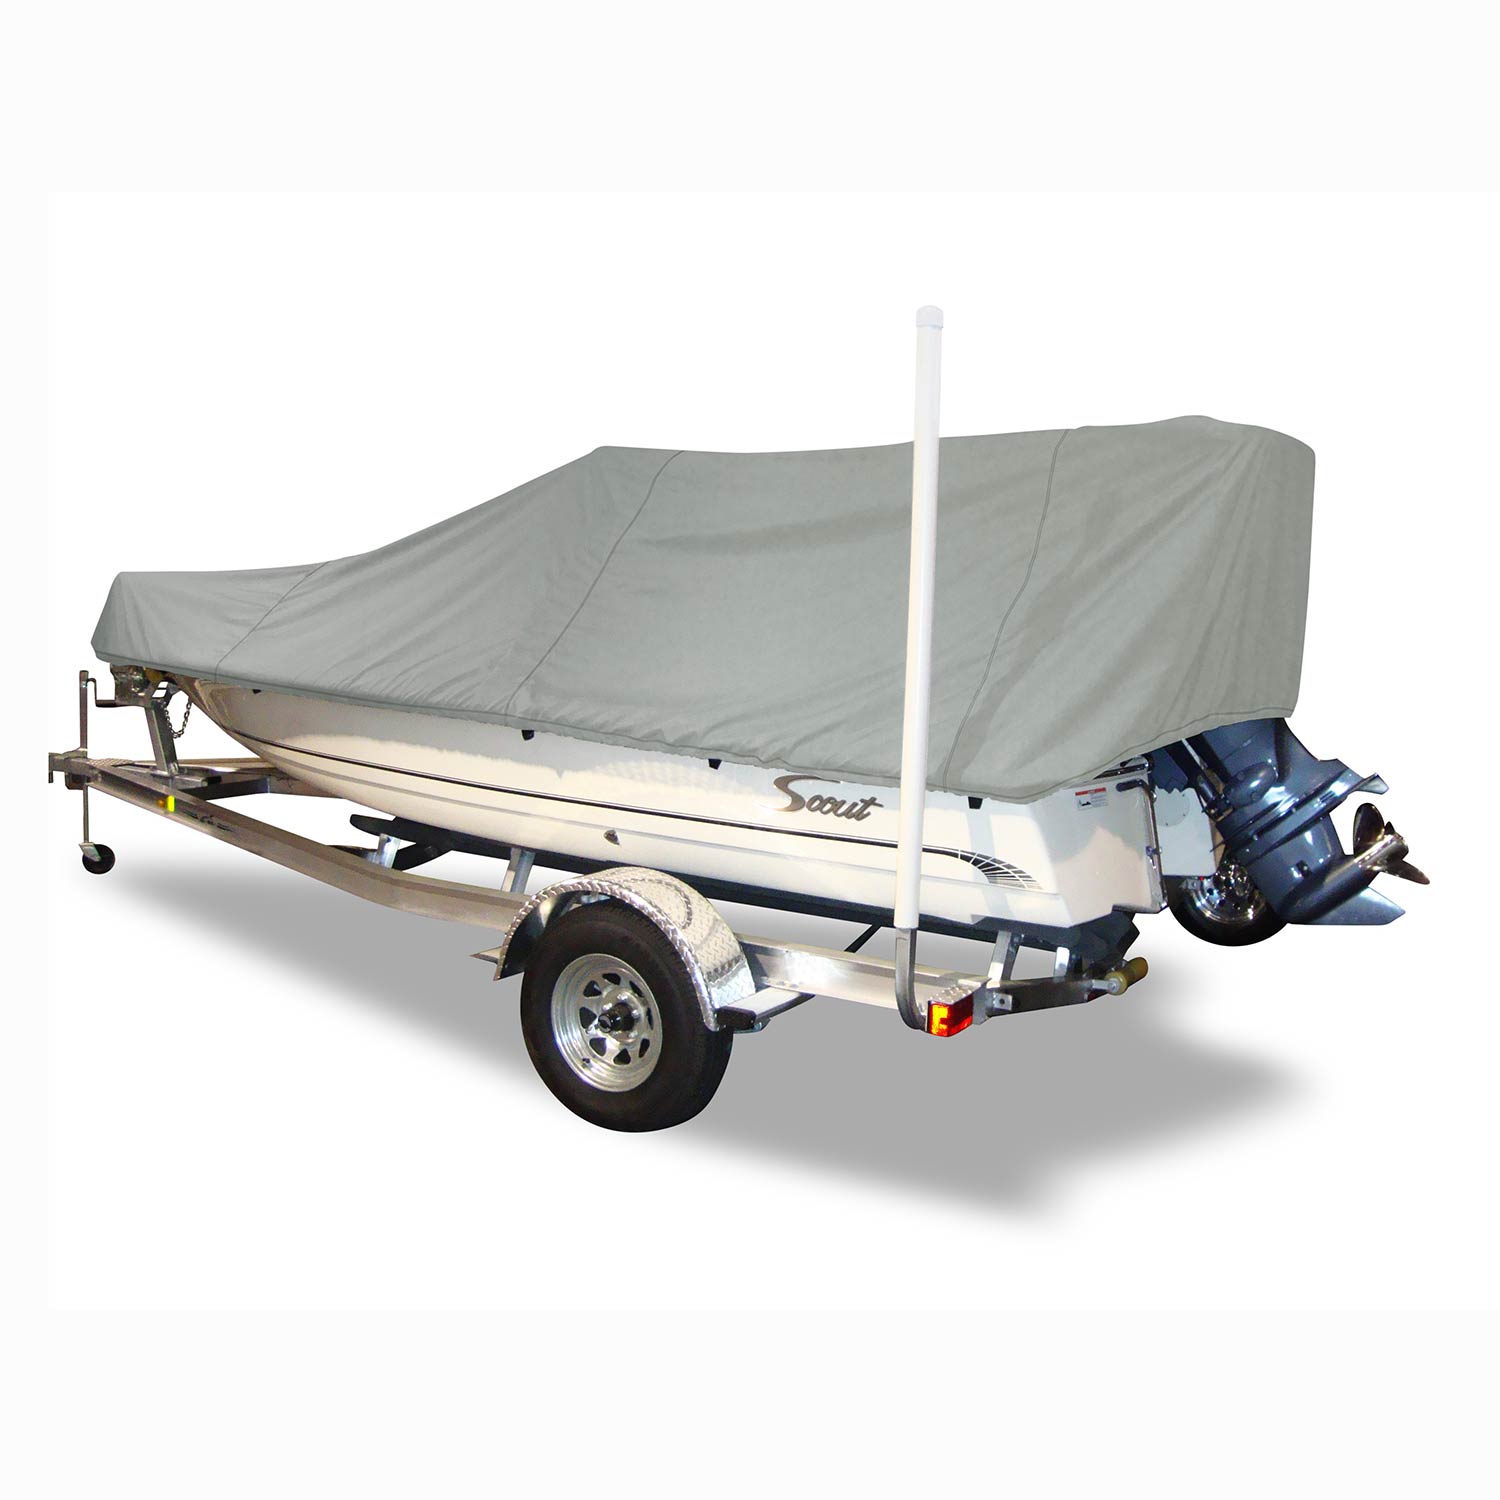 CARVER 14'6 Styled-to-Fit Boat Cover for Wide V-Hull Fishing Boats O/B